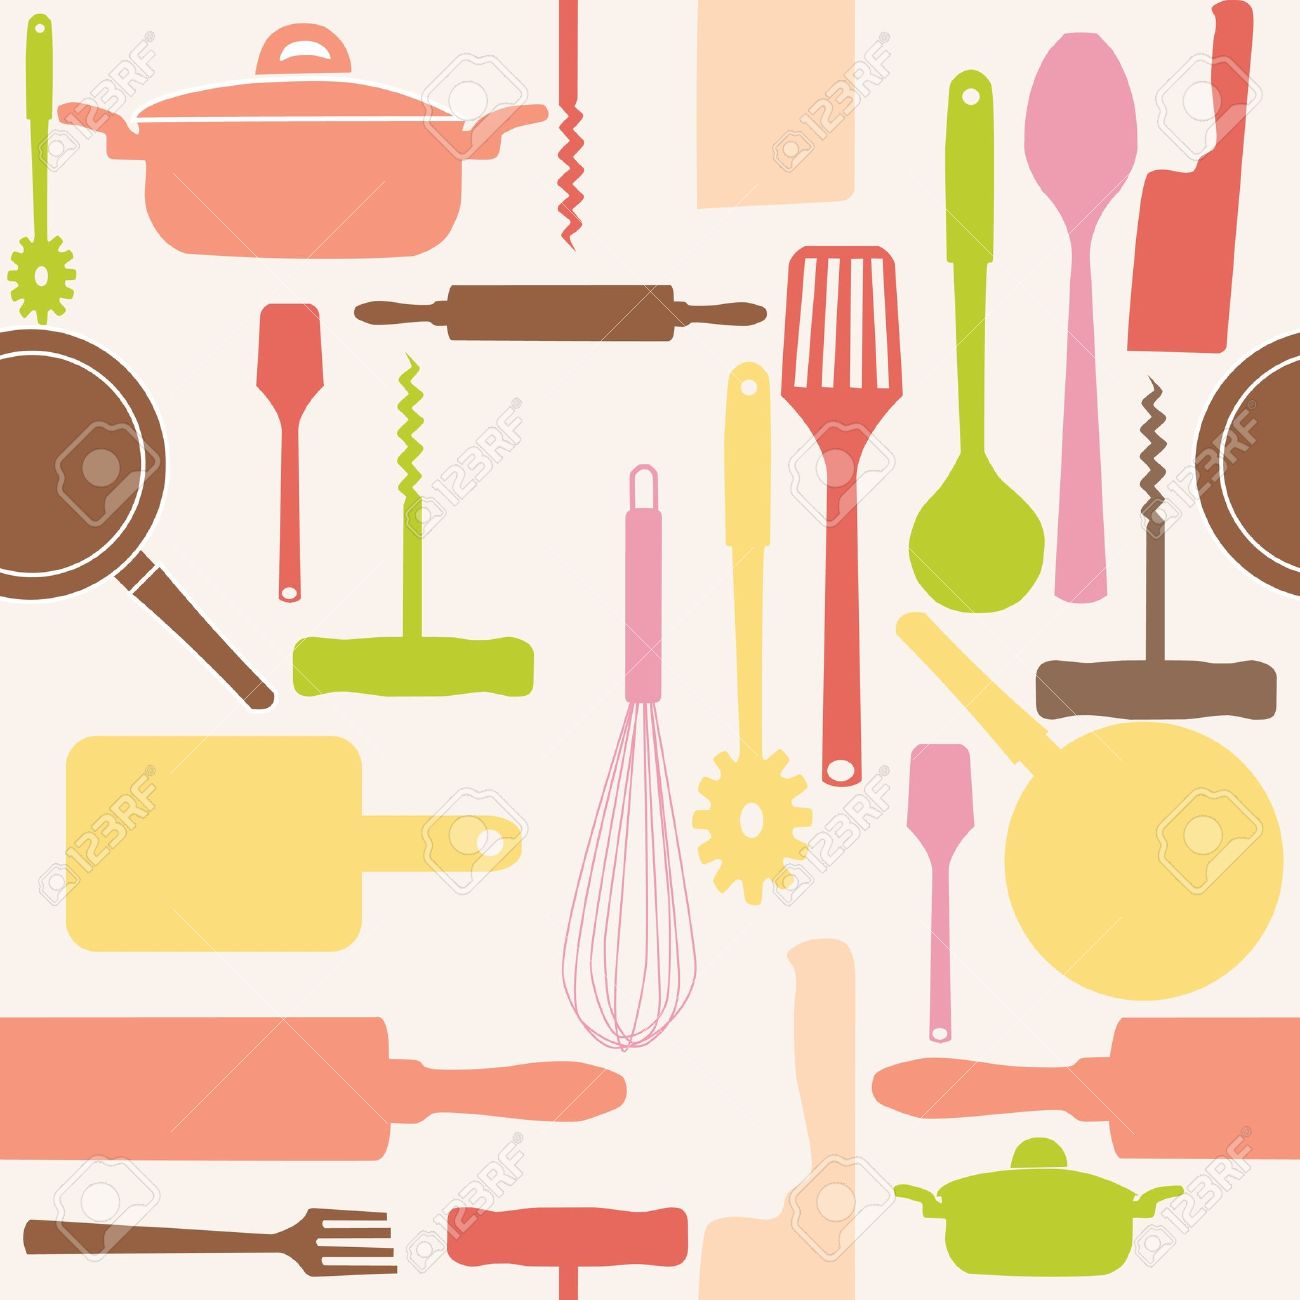 clipart of kitchen tools - photo #18